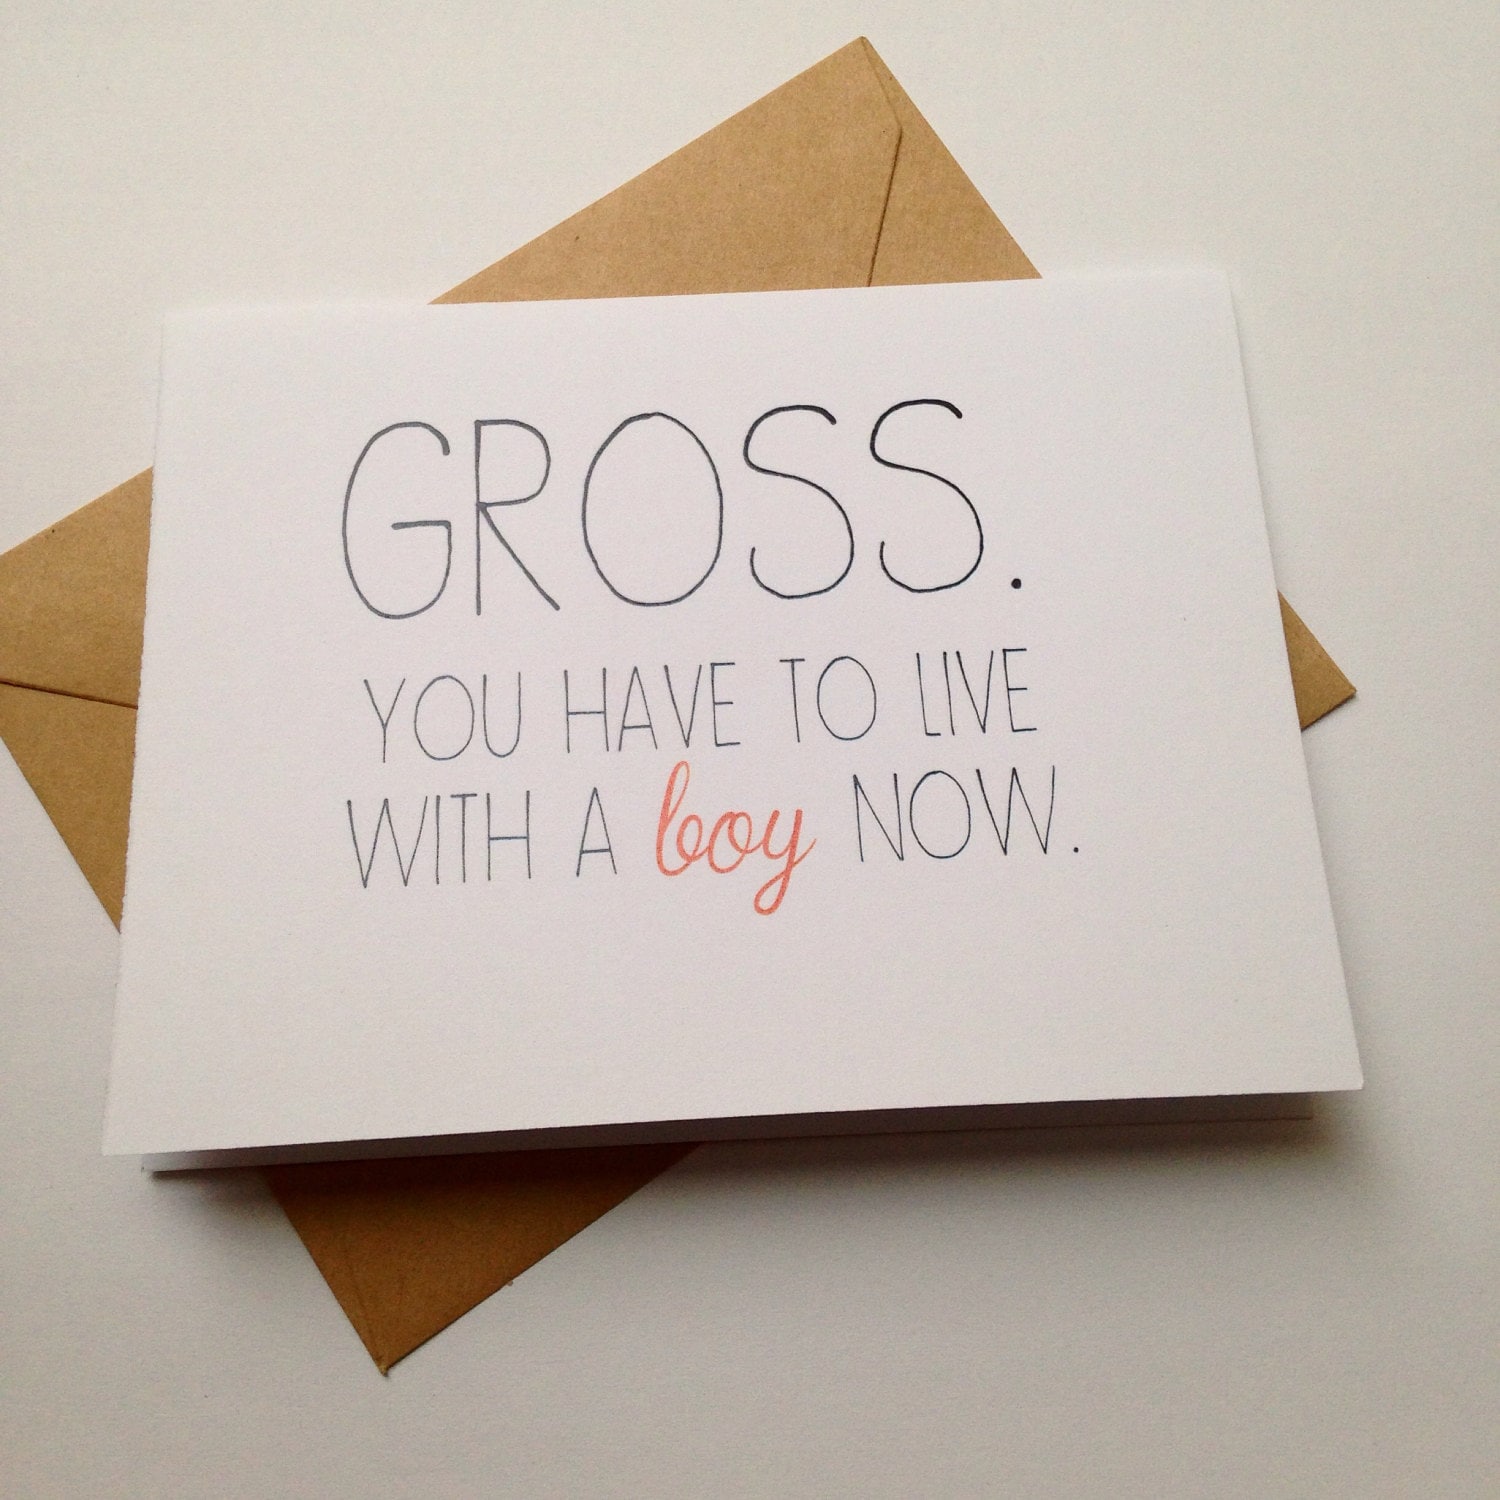 Funny Engagement Card / Humor Wedding Card / Moving In Card